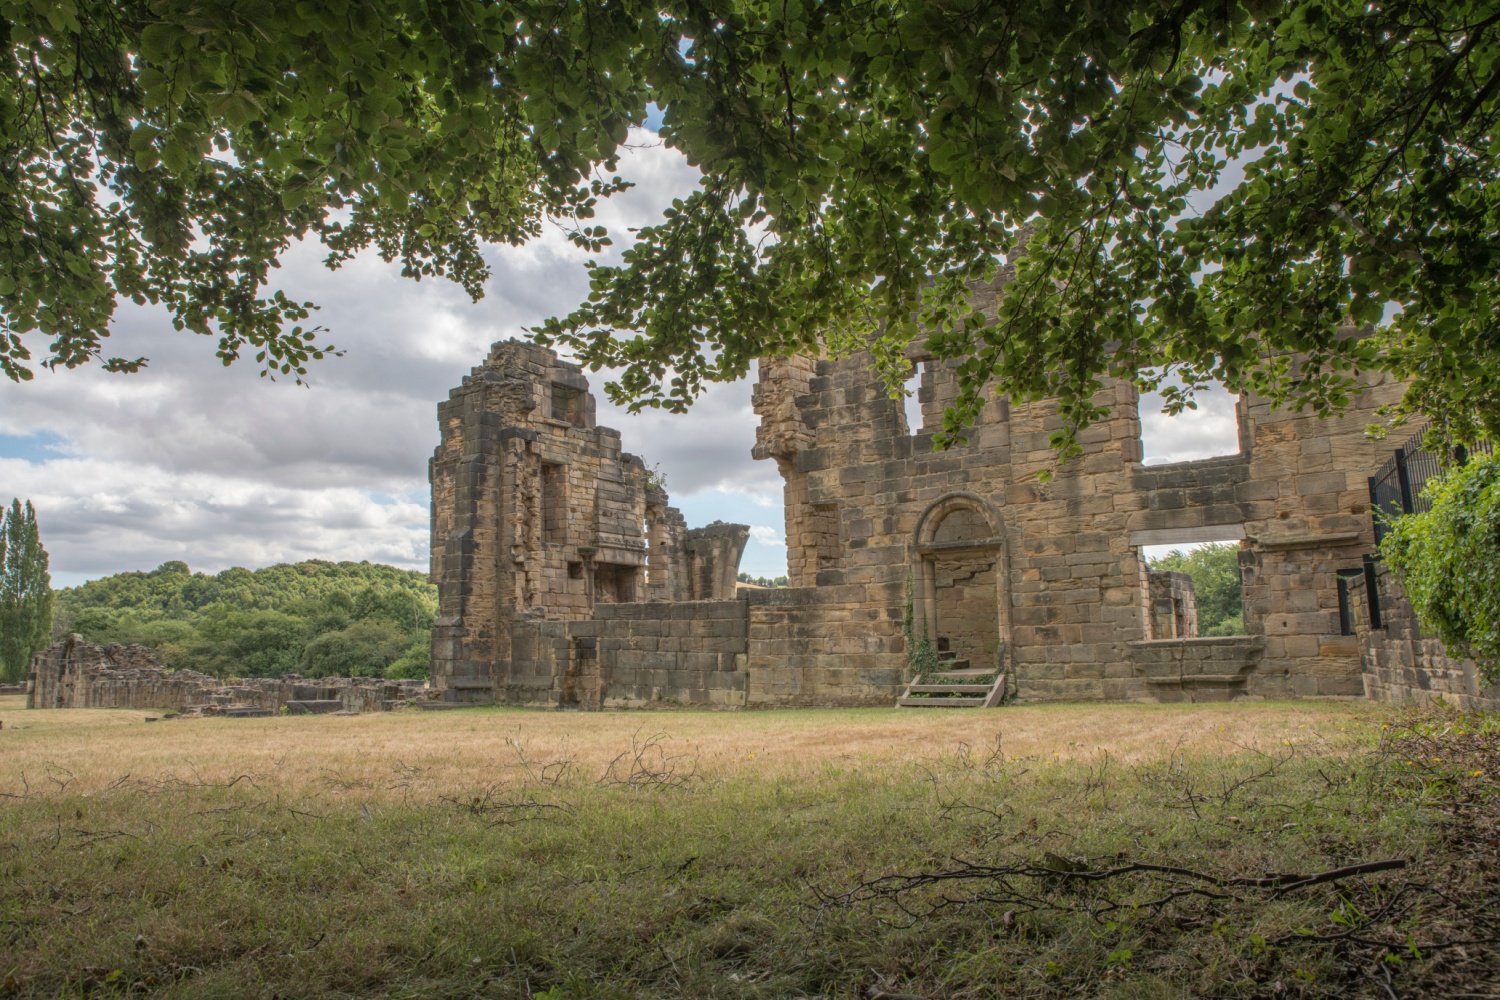 Image name monk bretton priory barnsley south yorkshire the 13 image from the post A look at the history of Monk Bretton Priory, Barnsley, with Dr Emma Wells in Yorkshire.com.